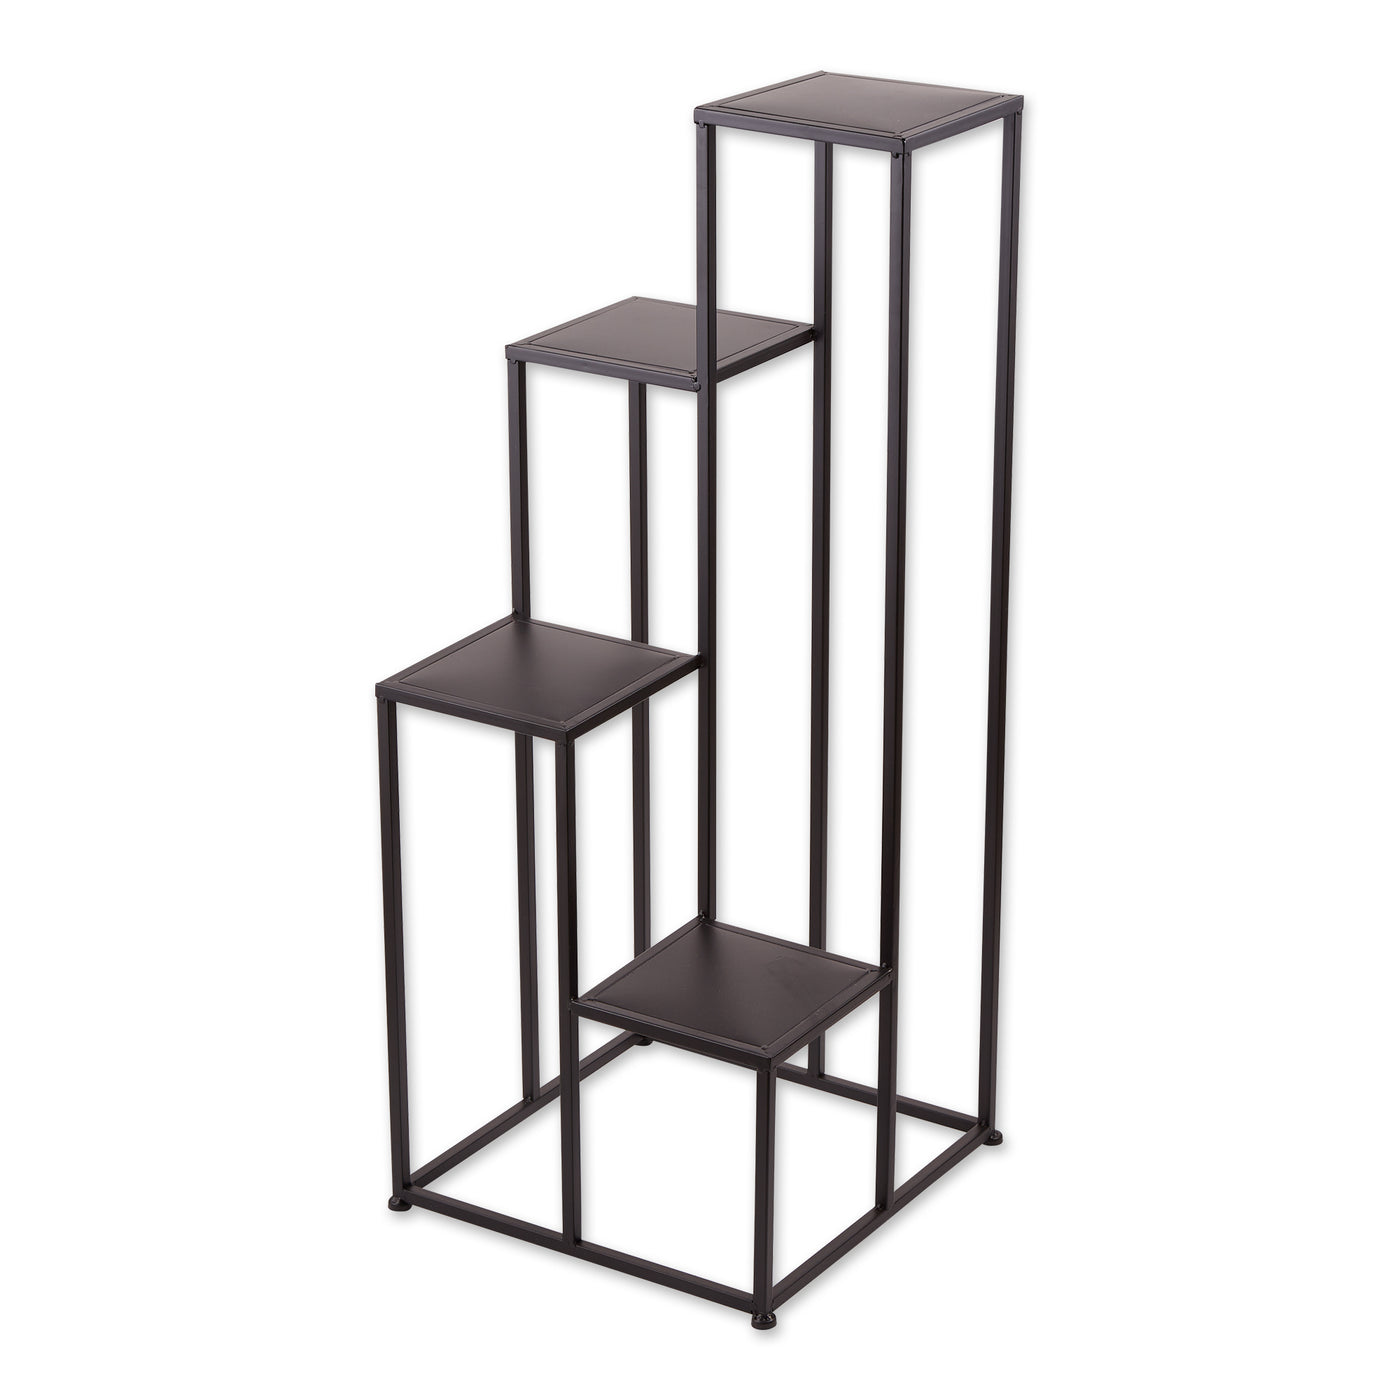 Four-Tier Modern Black Metal Plant Stand or Display Unit Summerfield Terrace